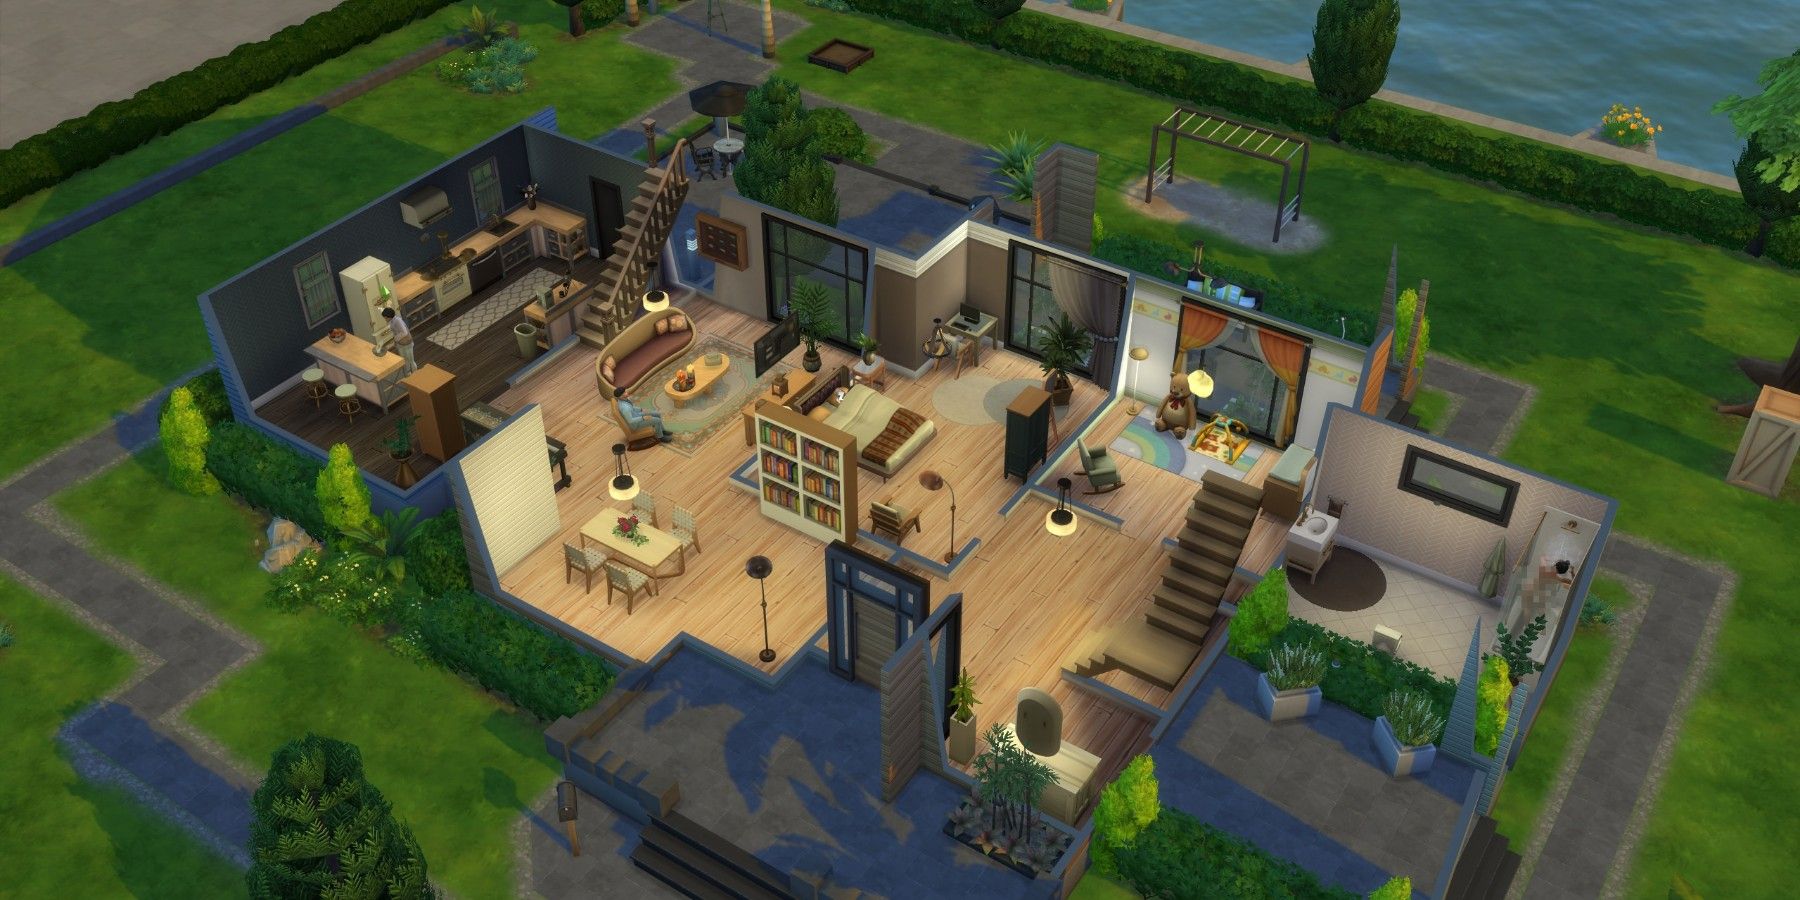 The inside of a house in The Sims 4